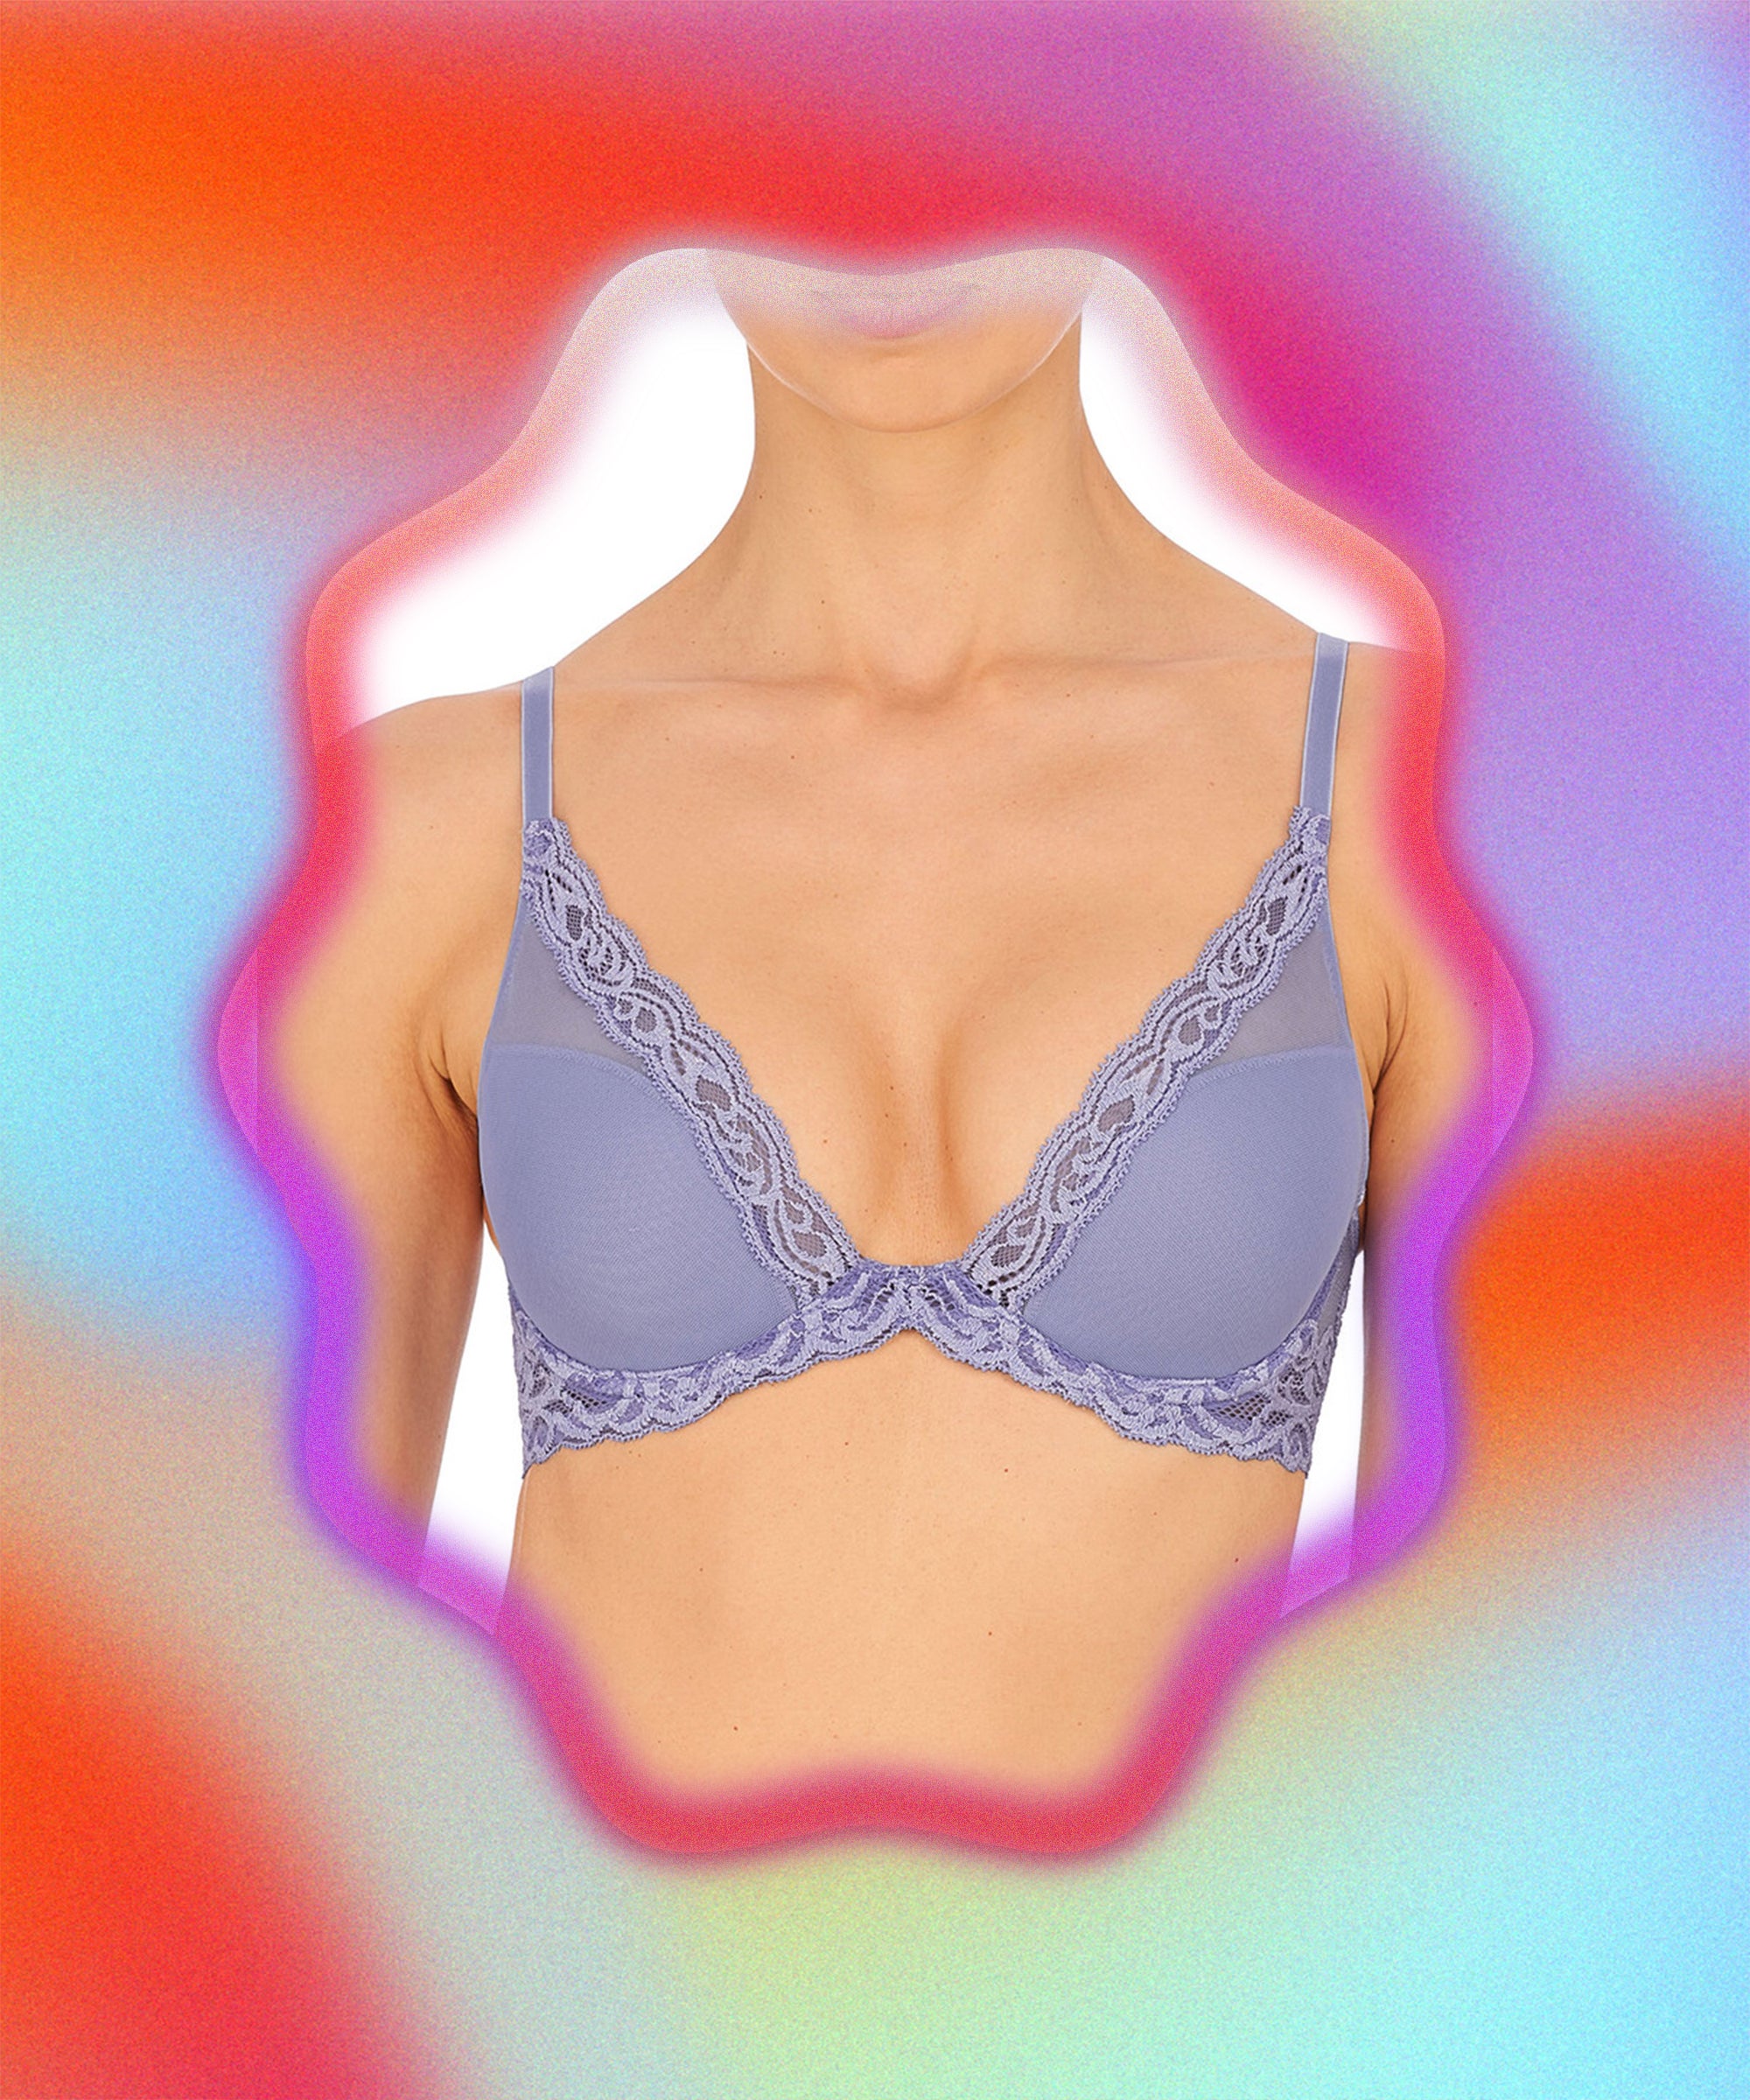 About Bluebell Bras – Bluebell Bras